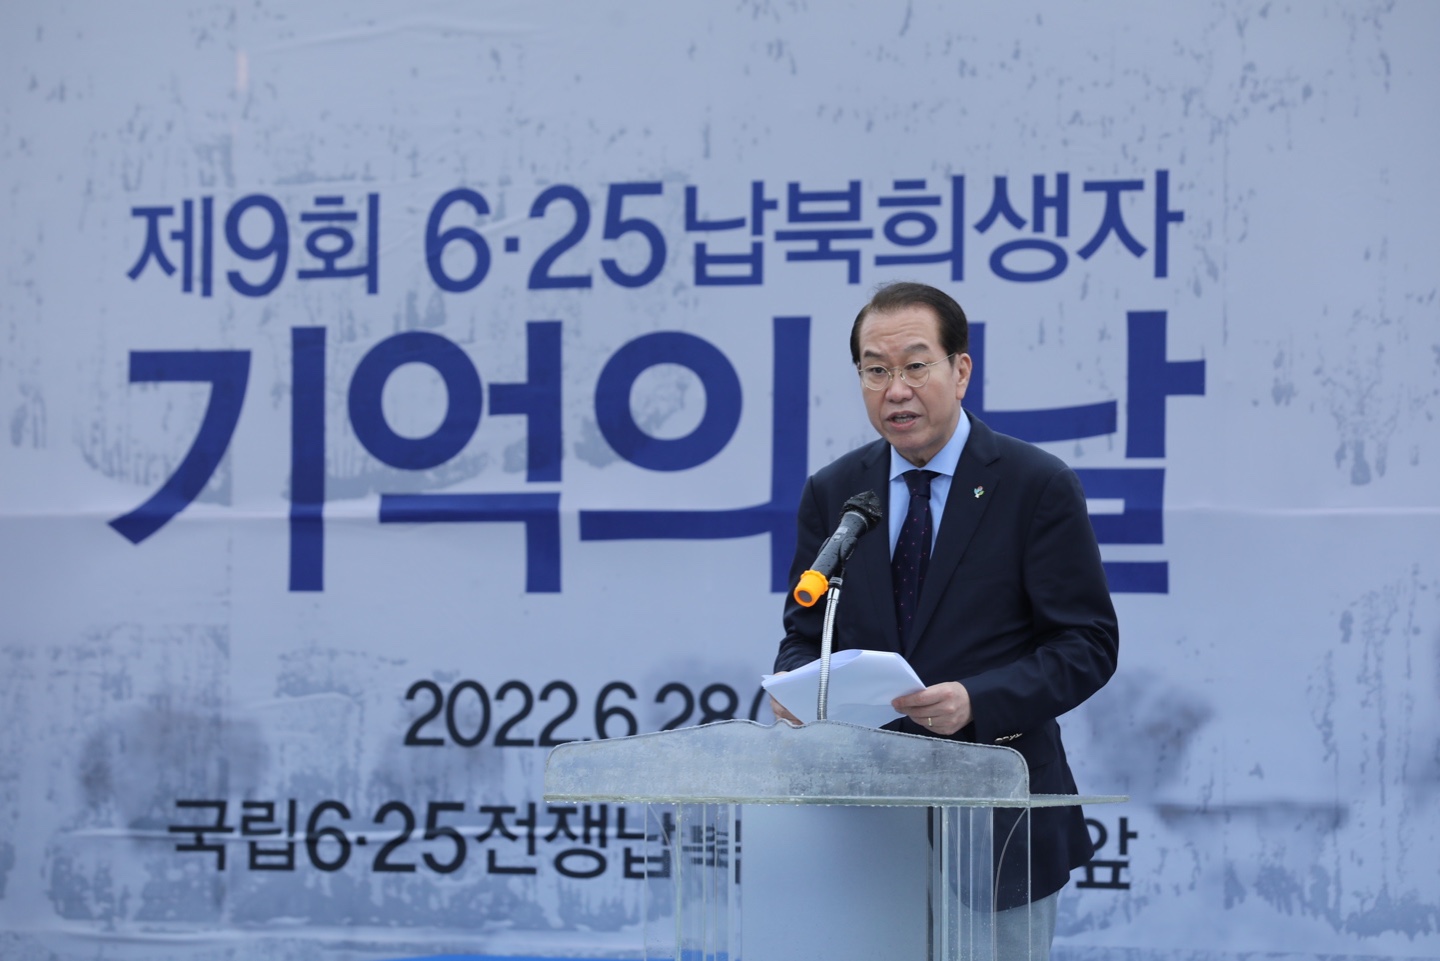 Unification Minister Kwon Youngse Delivers Remarks at the 9th Korean War Abductees Remembrance Day